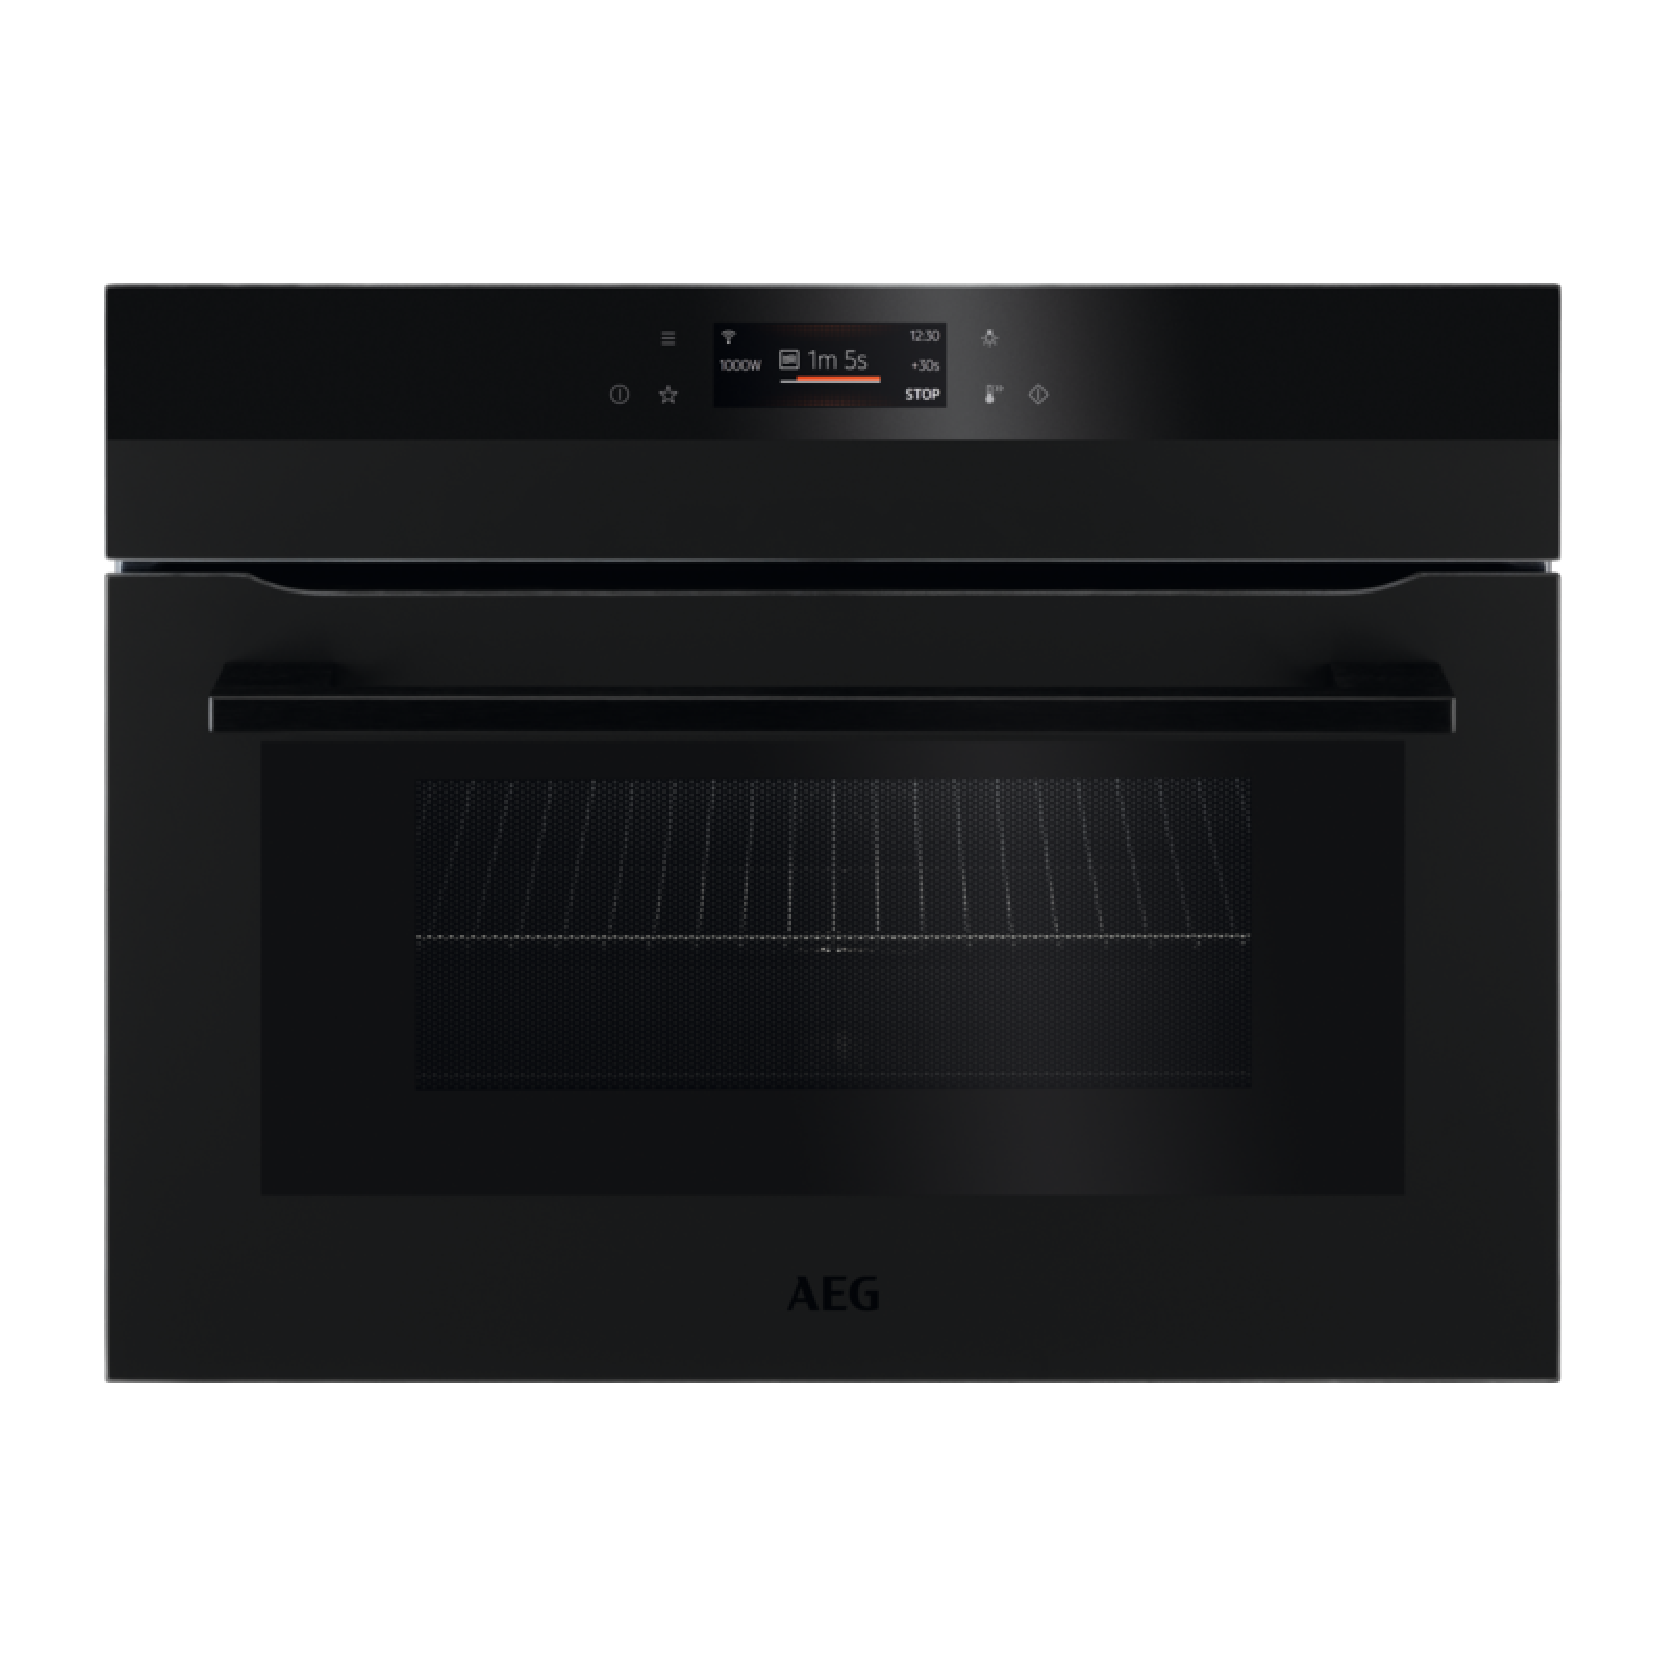 MATT BLACK COMBIQUICK COMPACT MULTIFUNCTION OVEN WITH MICROWAVE AND TOUCH CONTROLS AEG | KMK768080T